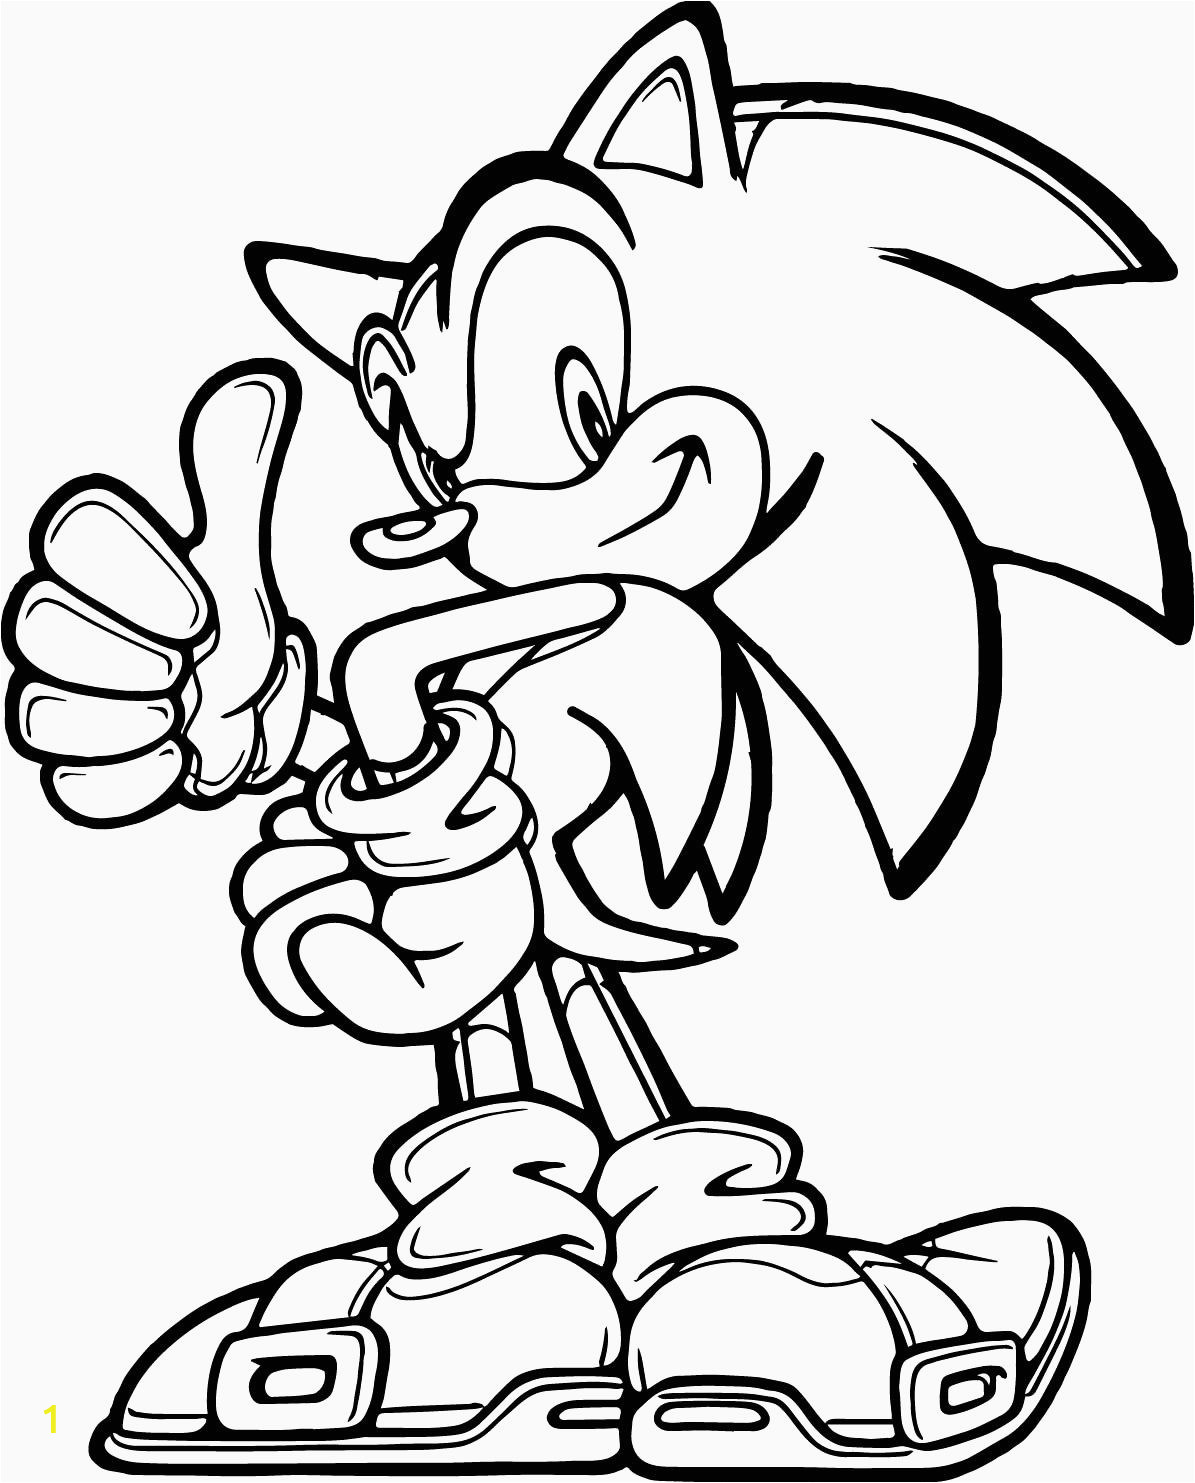 Sonic Unleashed Coloring Pages to Print sonic Unleashed sonic the Hedgehog Coloring Pages